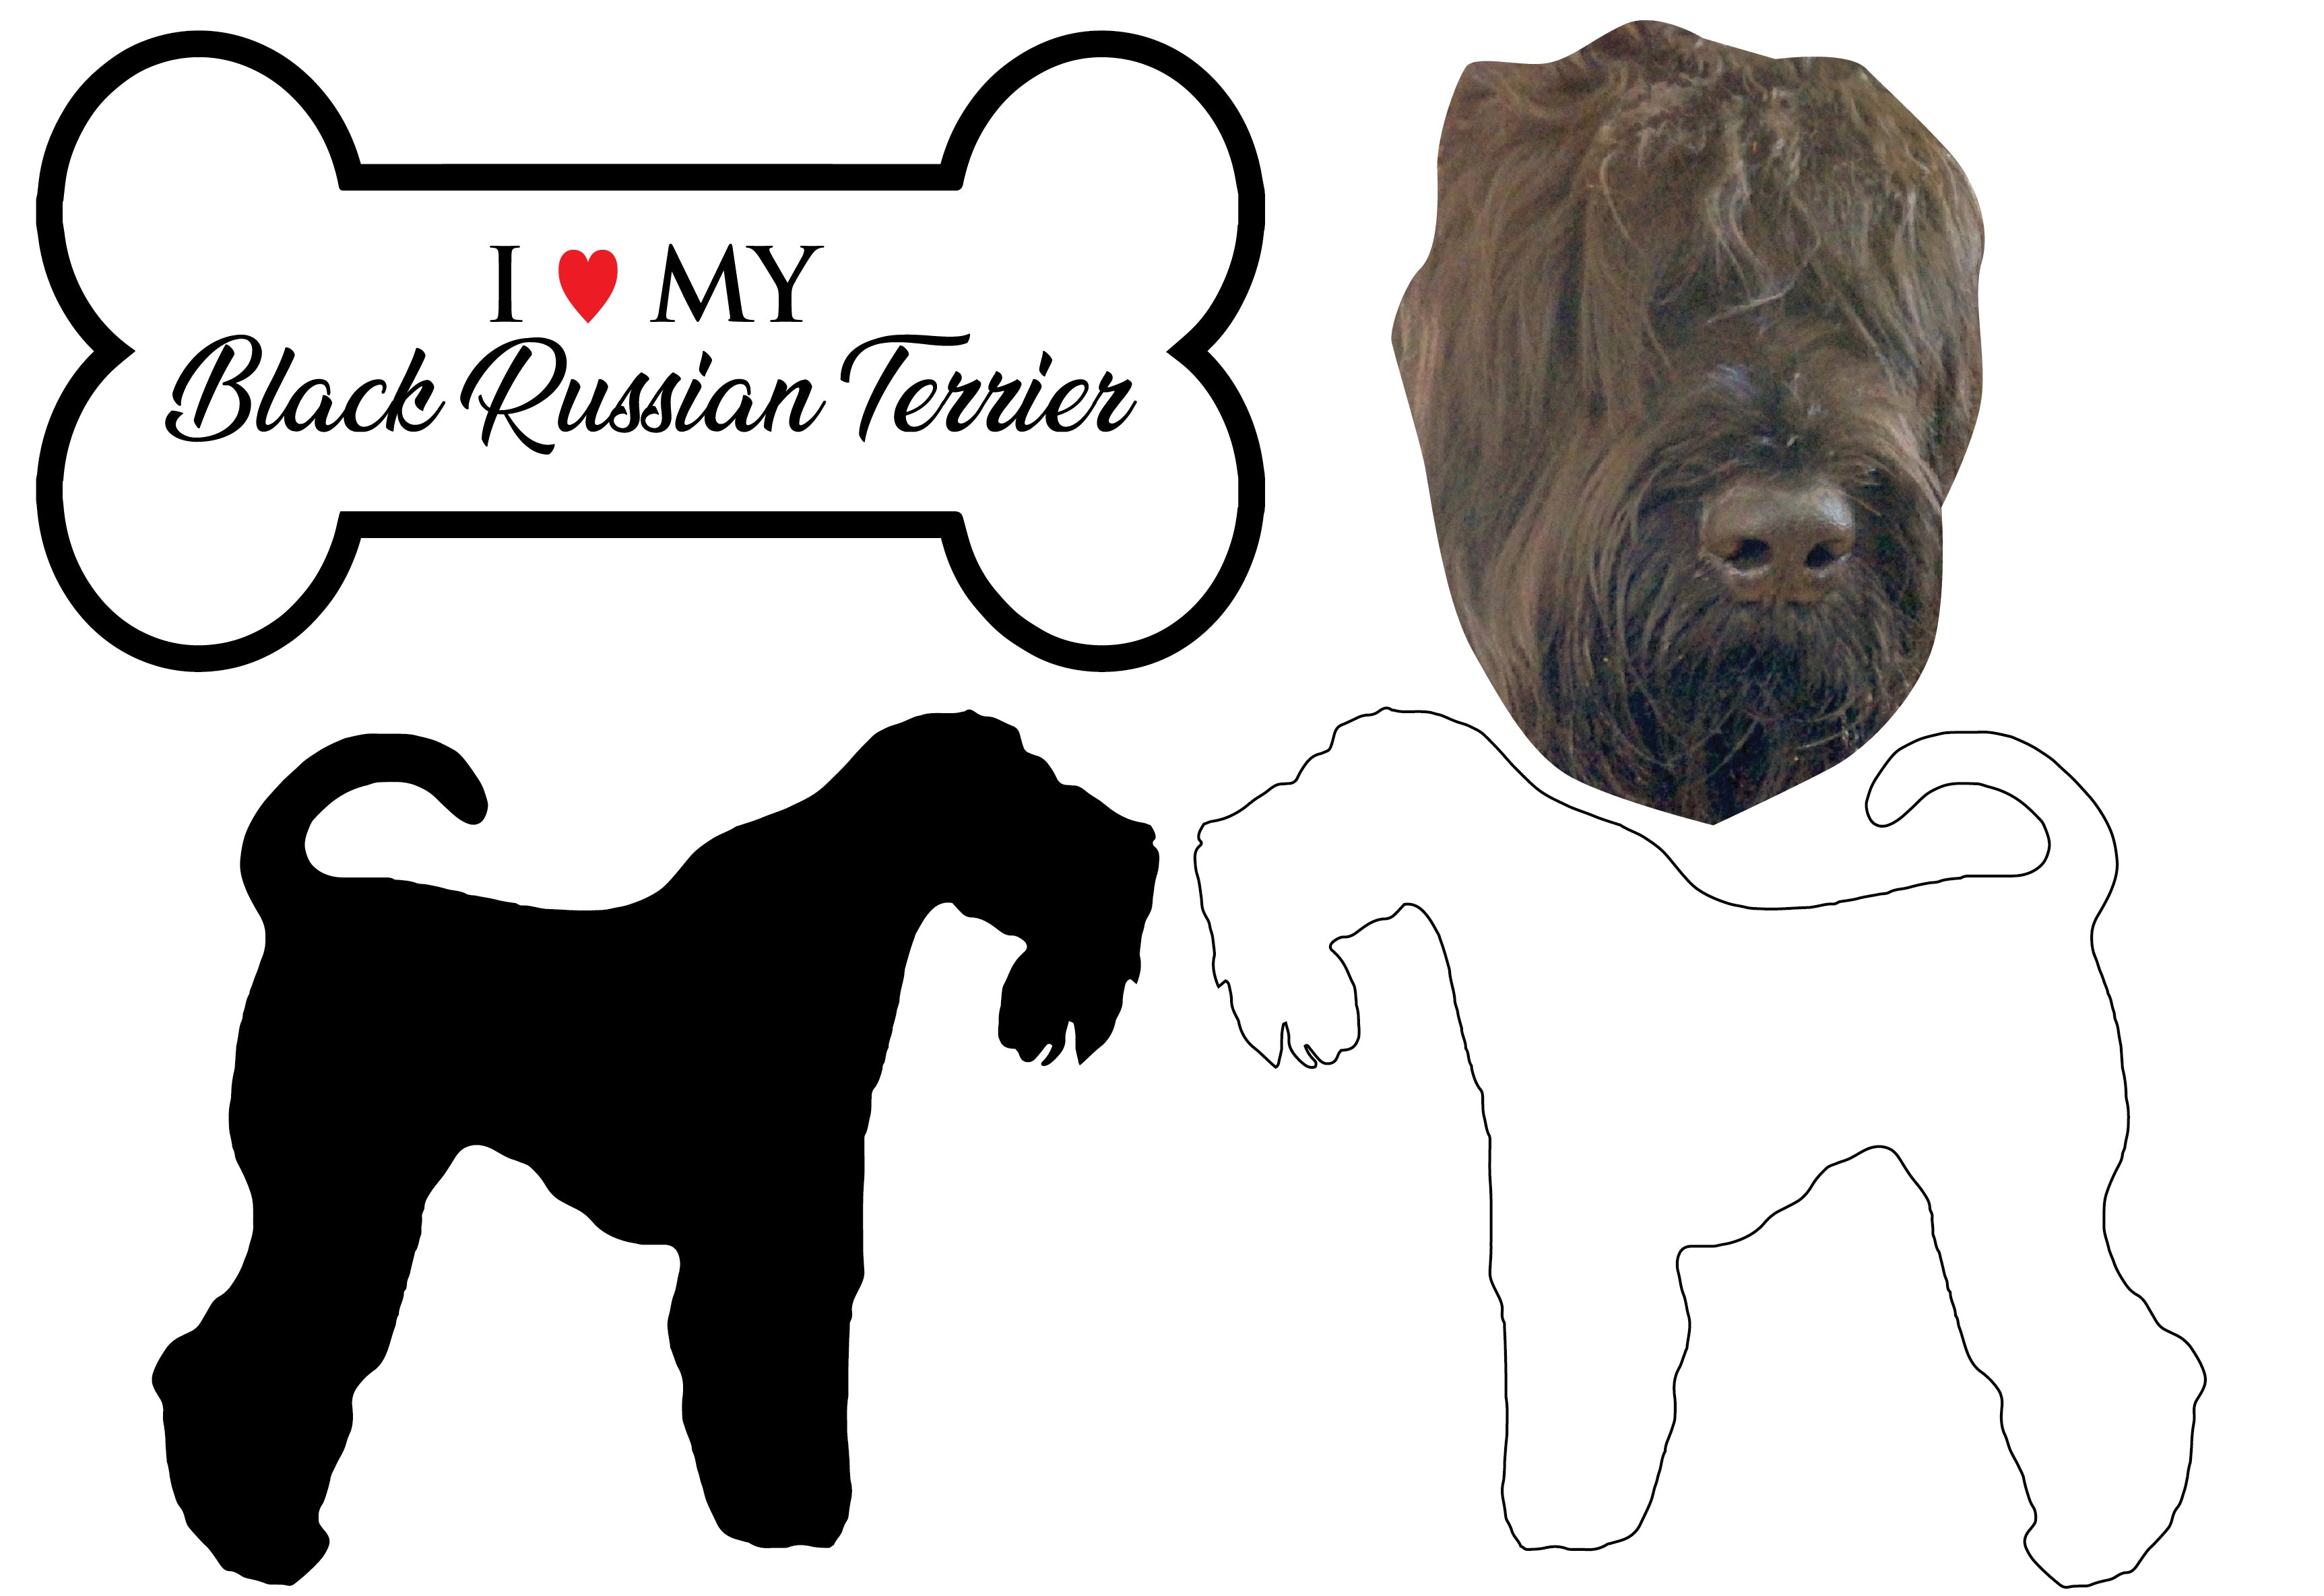 Black Russian Terrier - Dog Breed Decals (Set of 16) - Sizes in Description